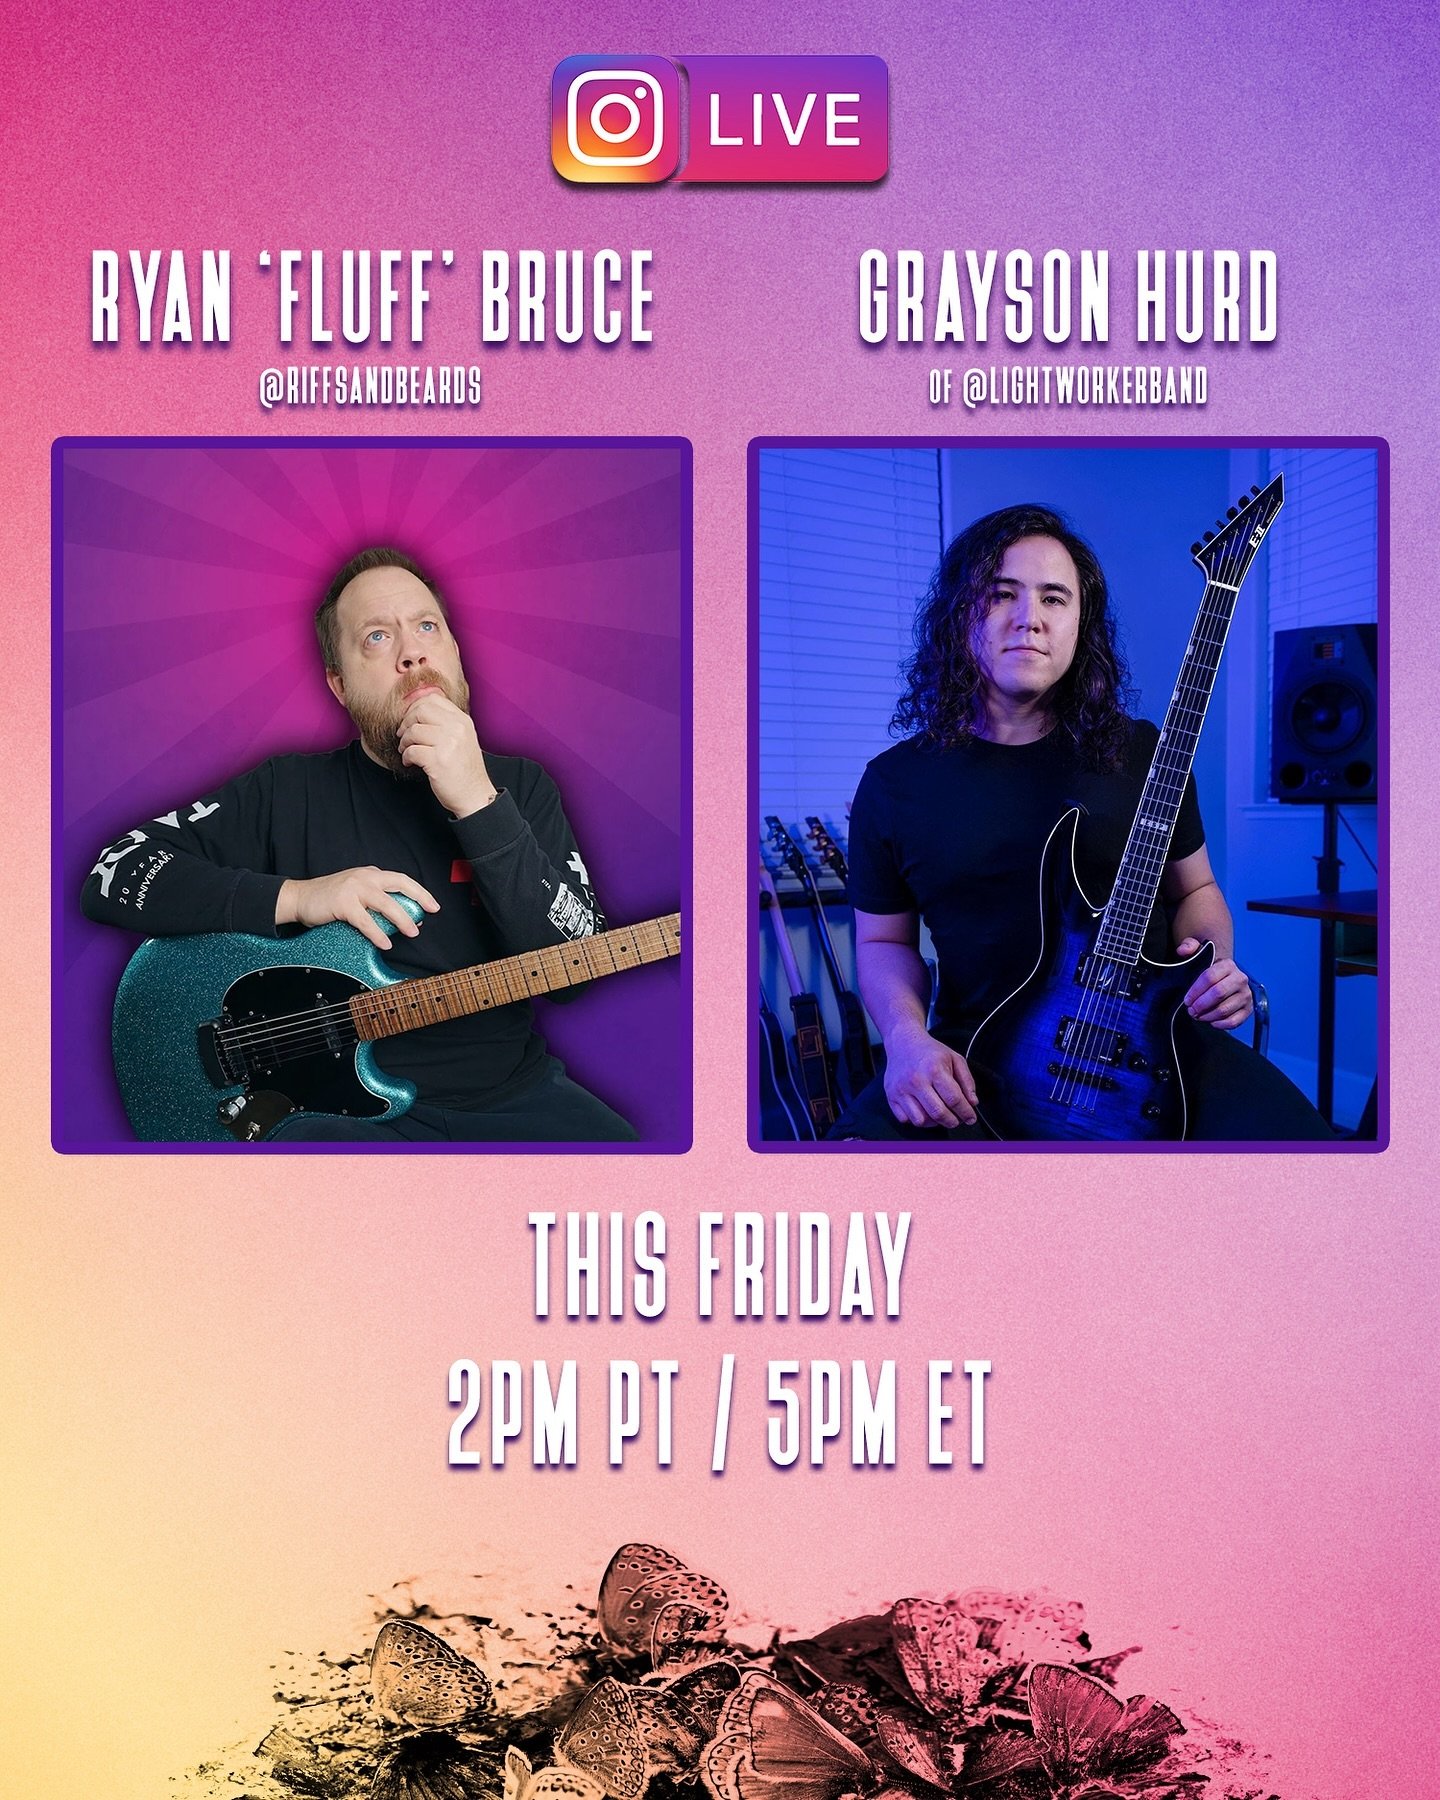 Grayson is going live with @riffsandbeards this Friday! Tune in here at 2pm PT / 5pm ET for a behind the scenes look at the gear we use, songwriting on the new album, and more 🔥👀